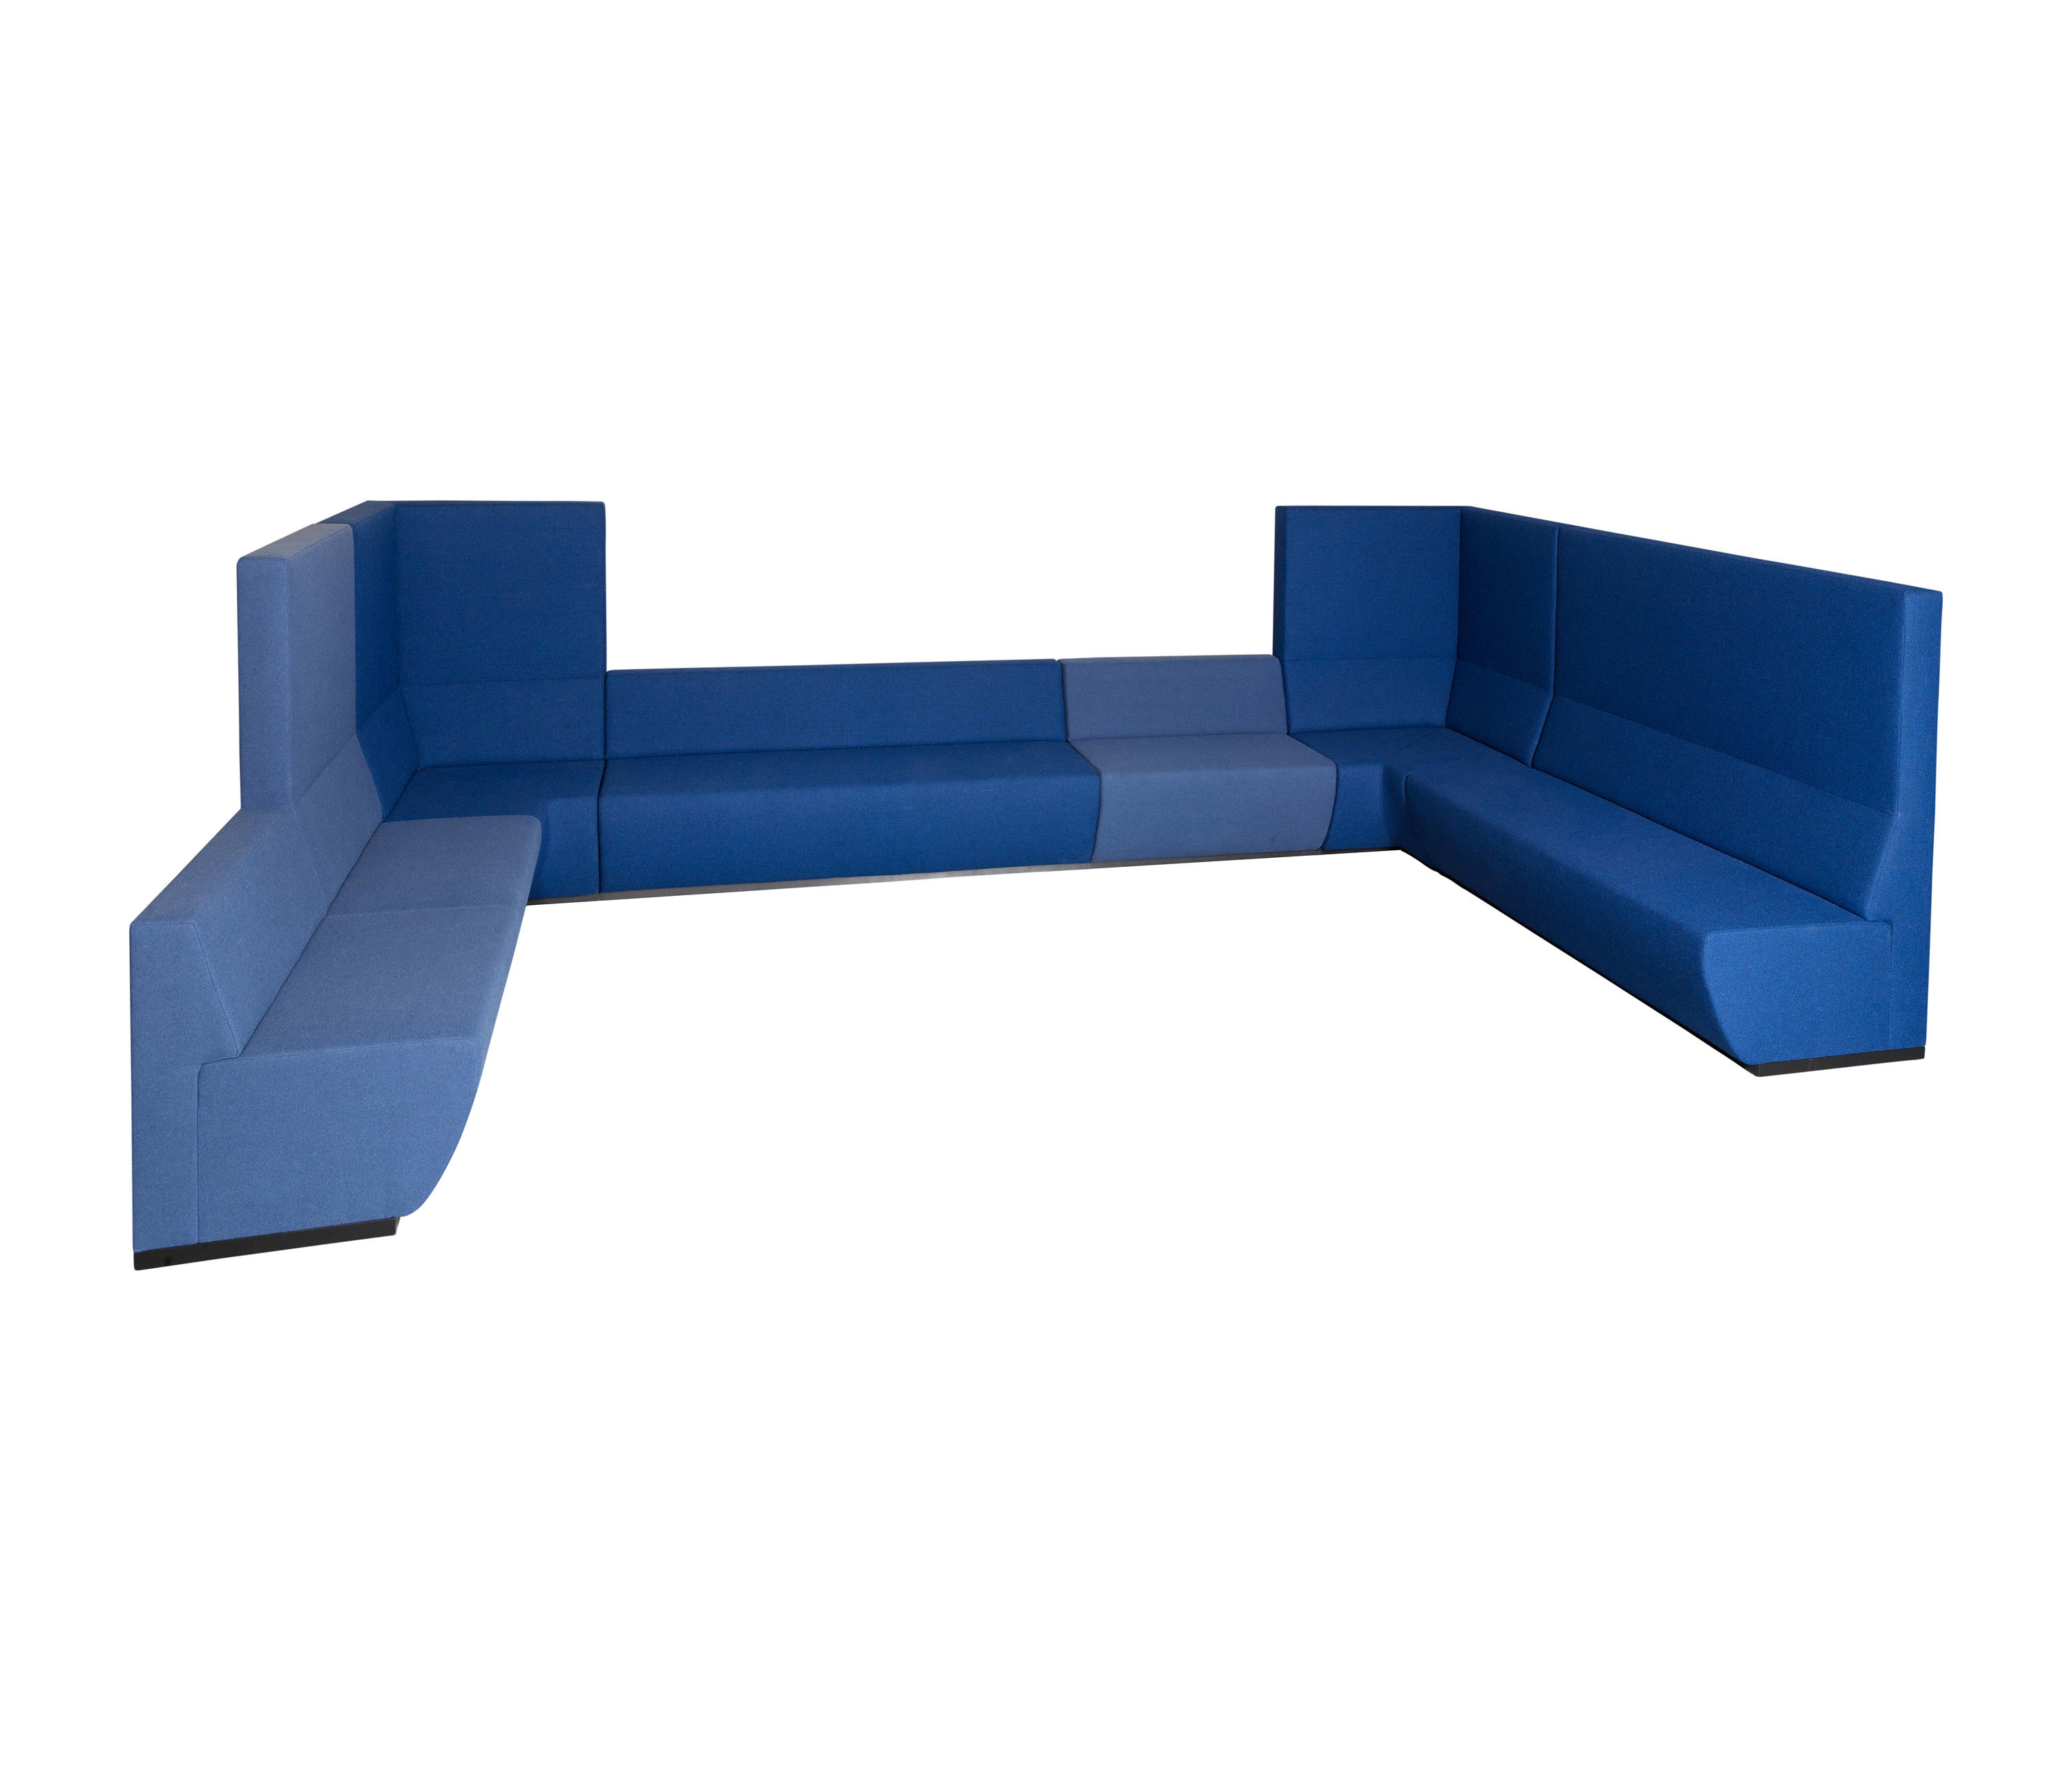 TRAIN BENCH - Sofas from Casala | Architonic